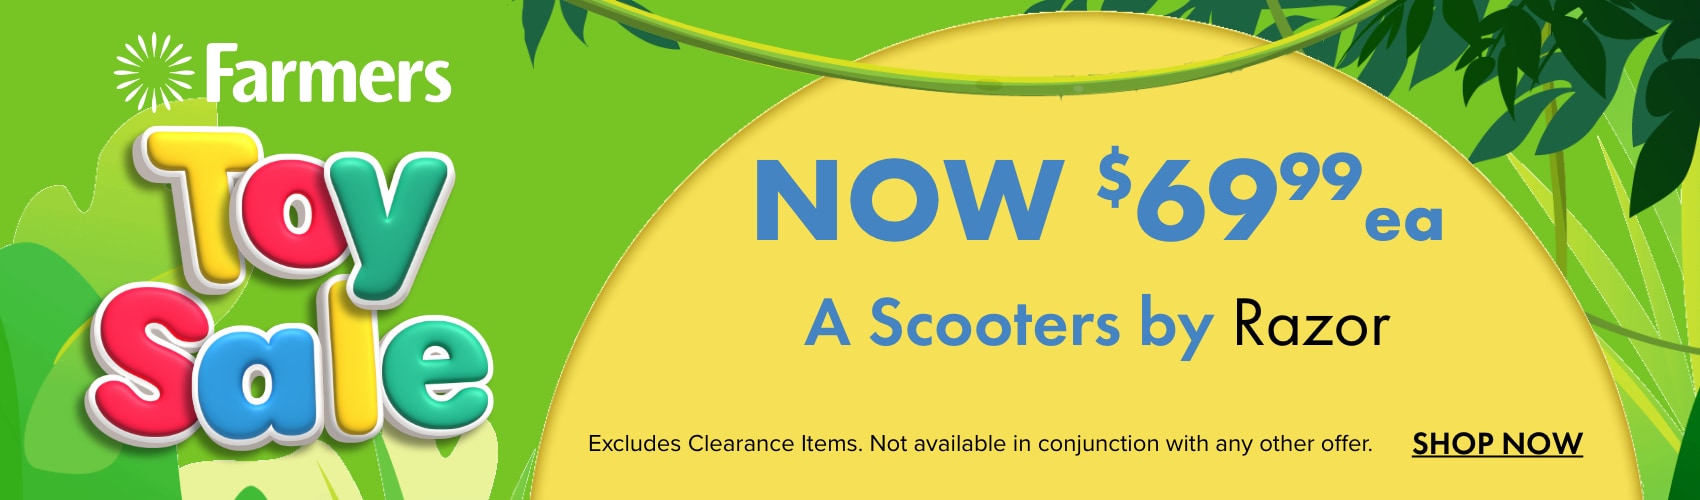 NOW $69.99ea A Scooters by Razor